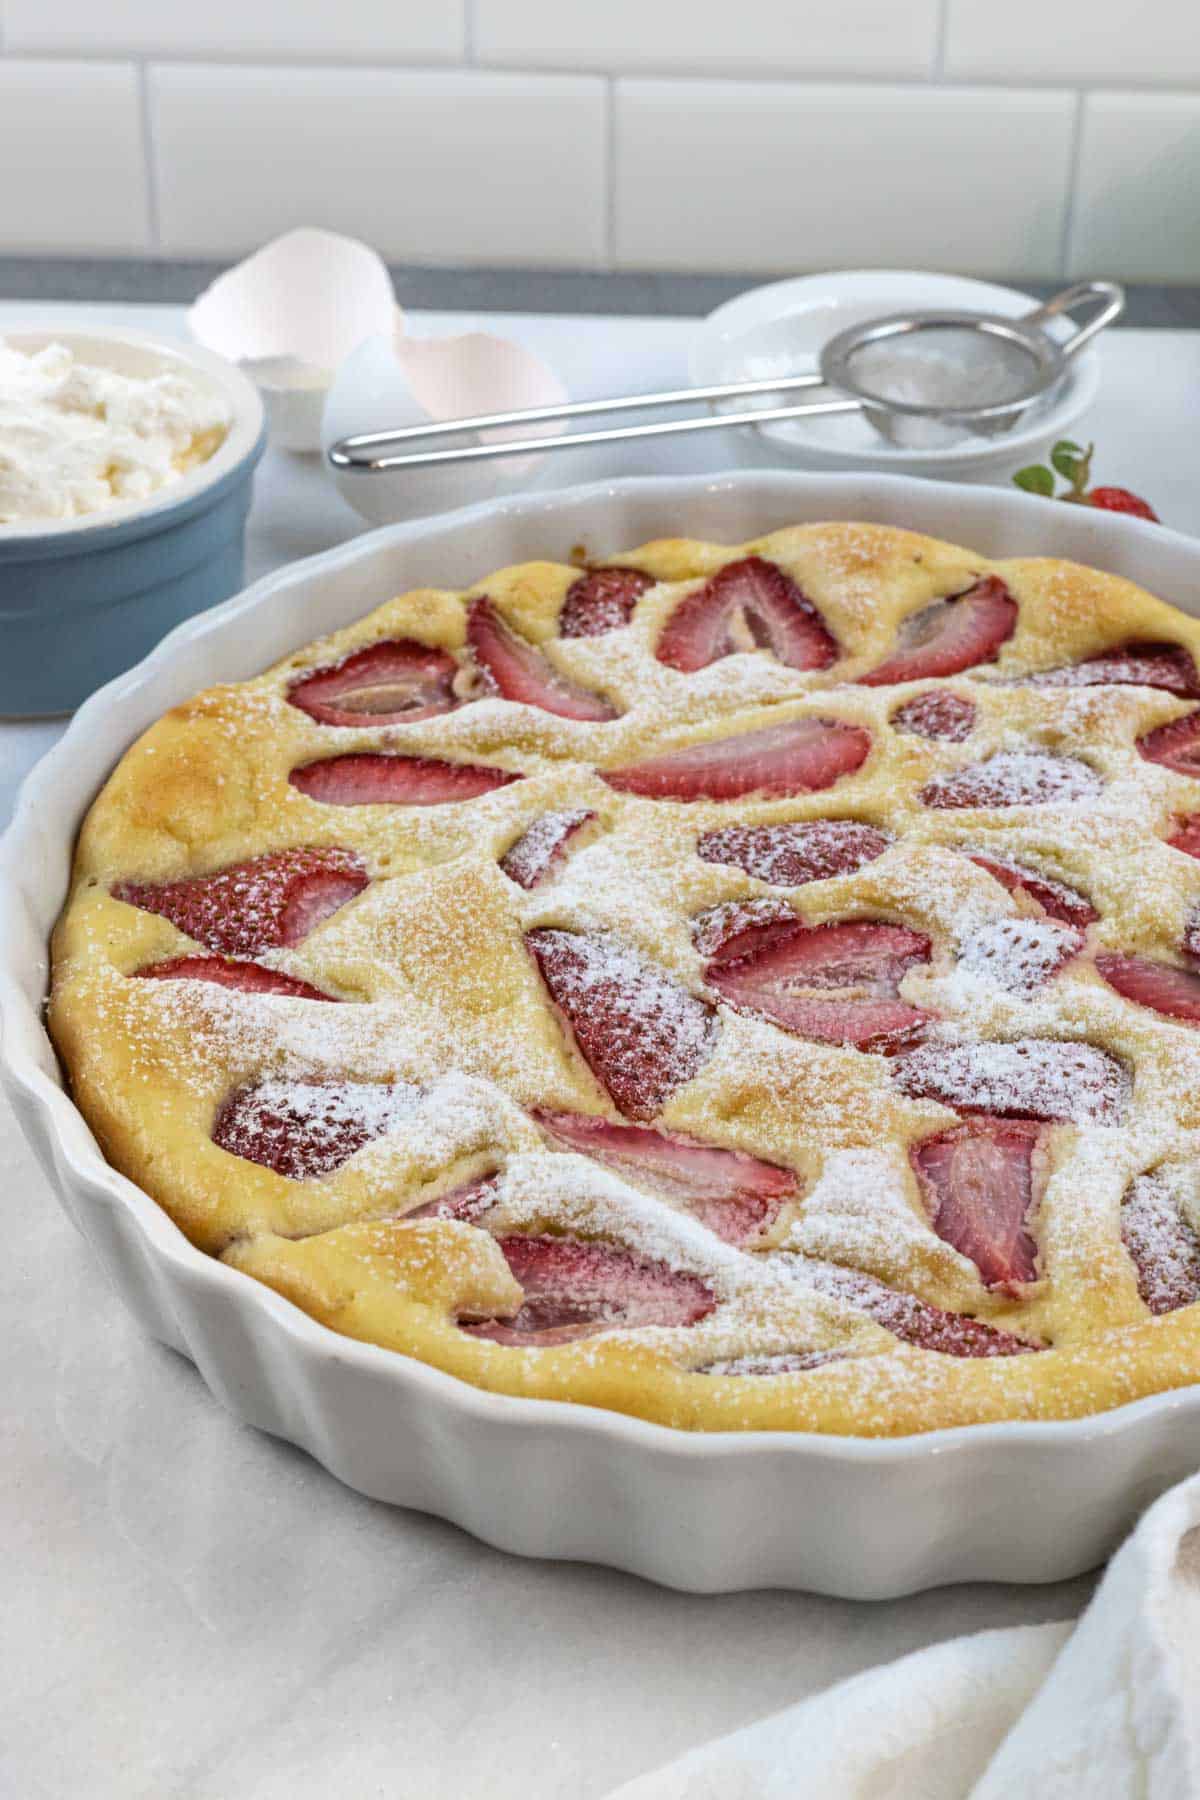 Baked clafoutis with strawberries in tart dish sprinkled with keto powdered sweetener and egg shell halves on the side.